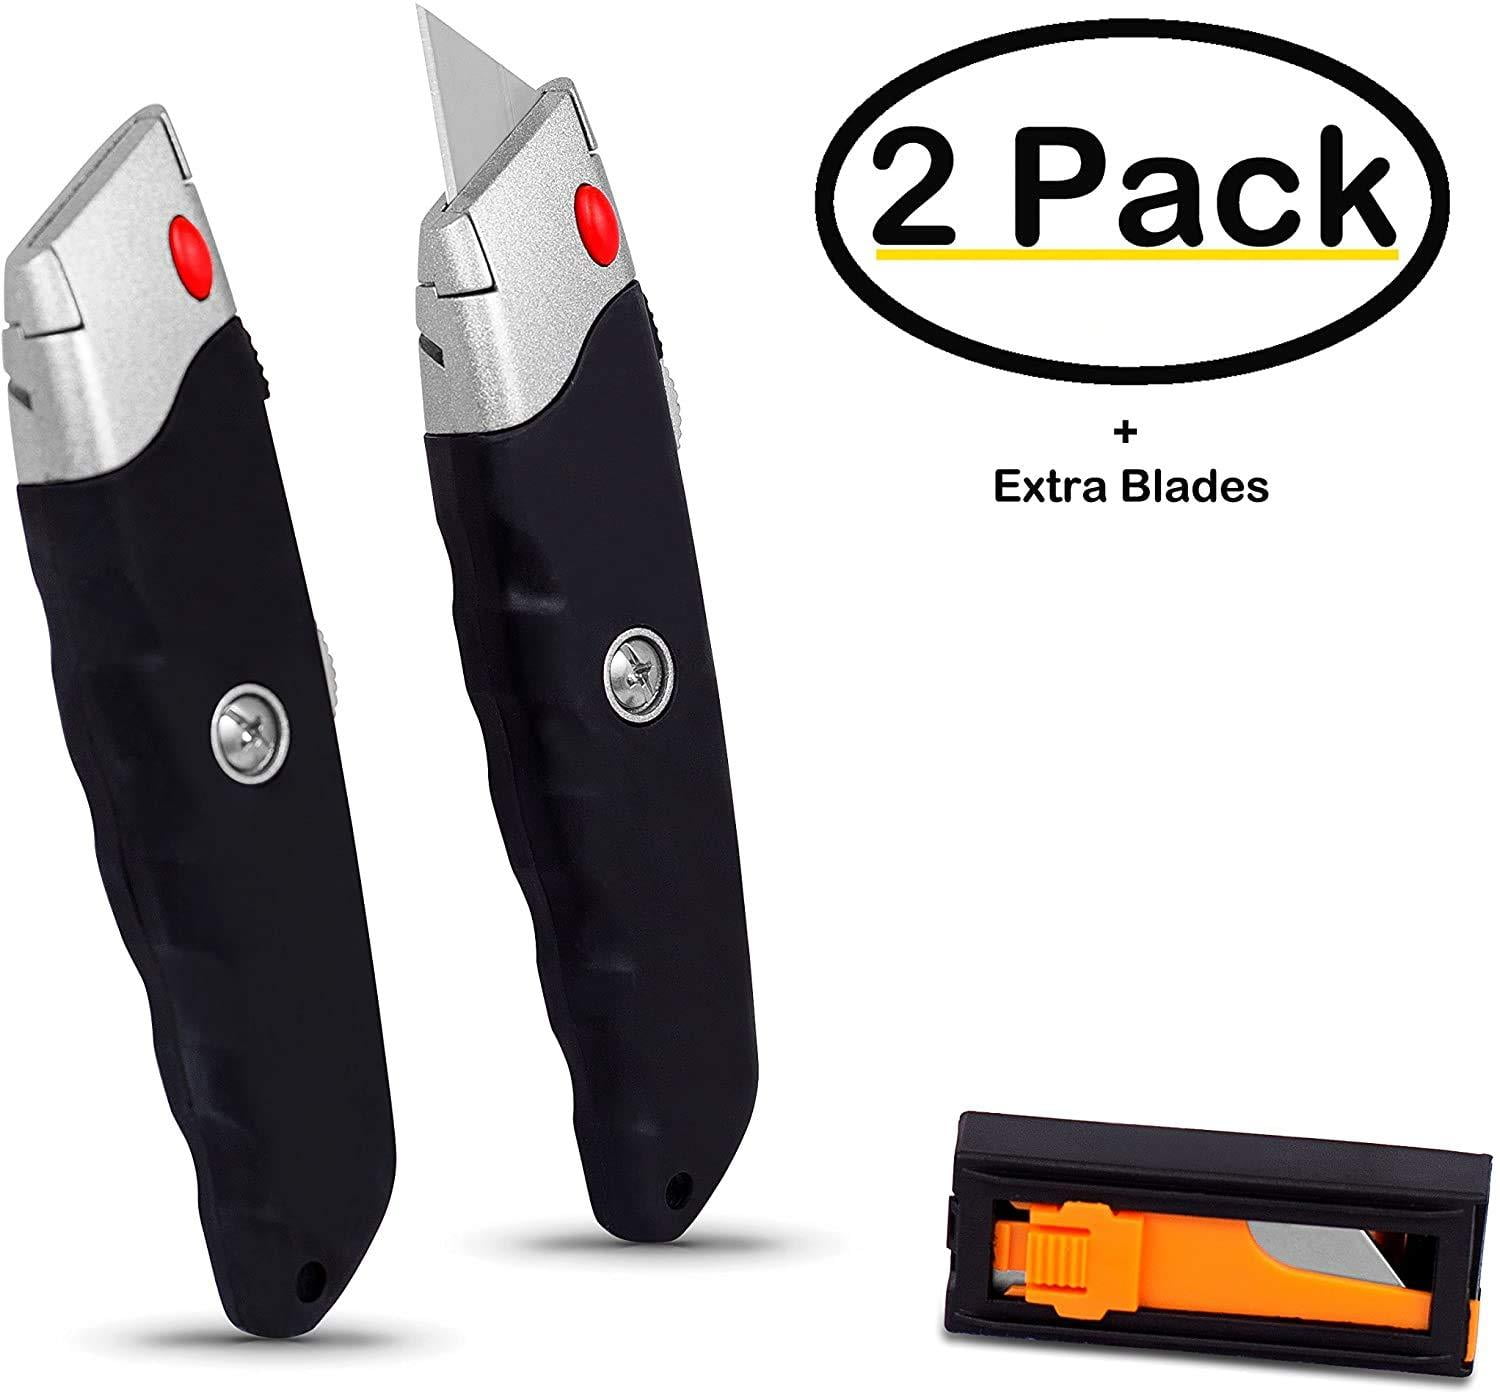 ValueMax 2-Pack Box Cutter Knife - You will want to watch how it cuts and  works in real life 